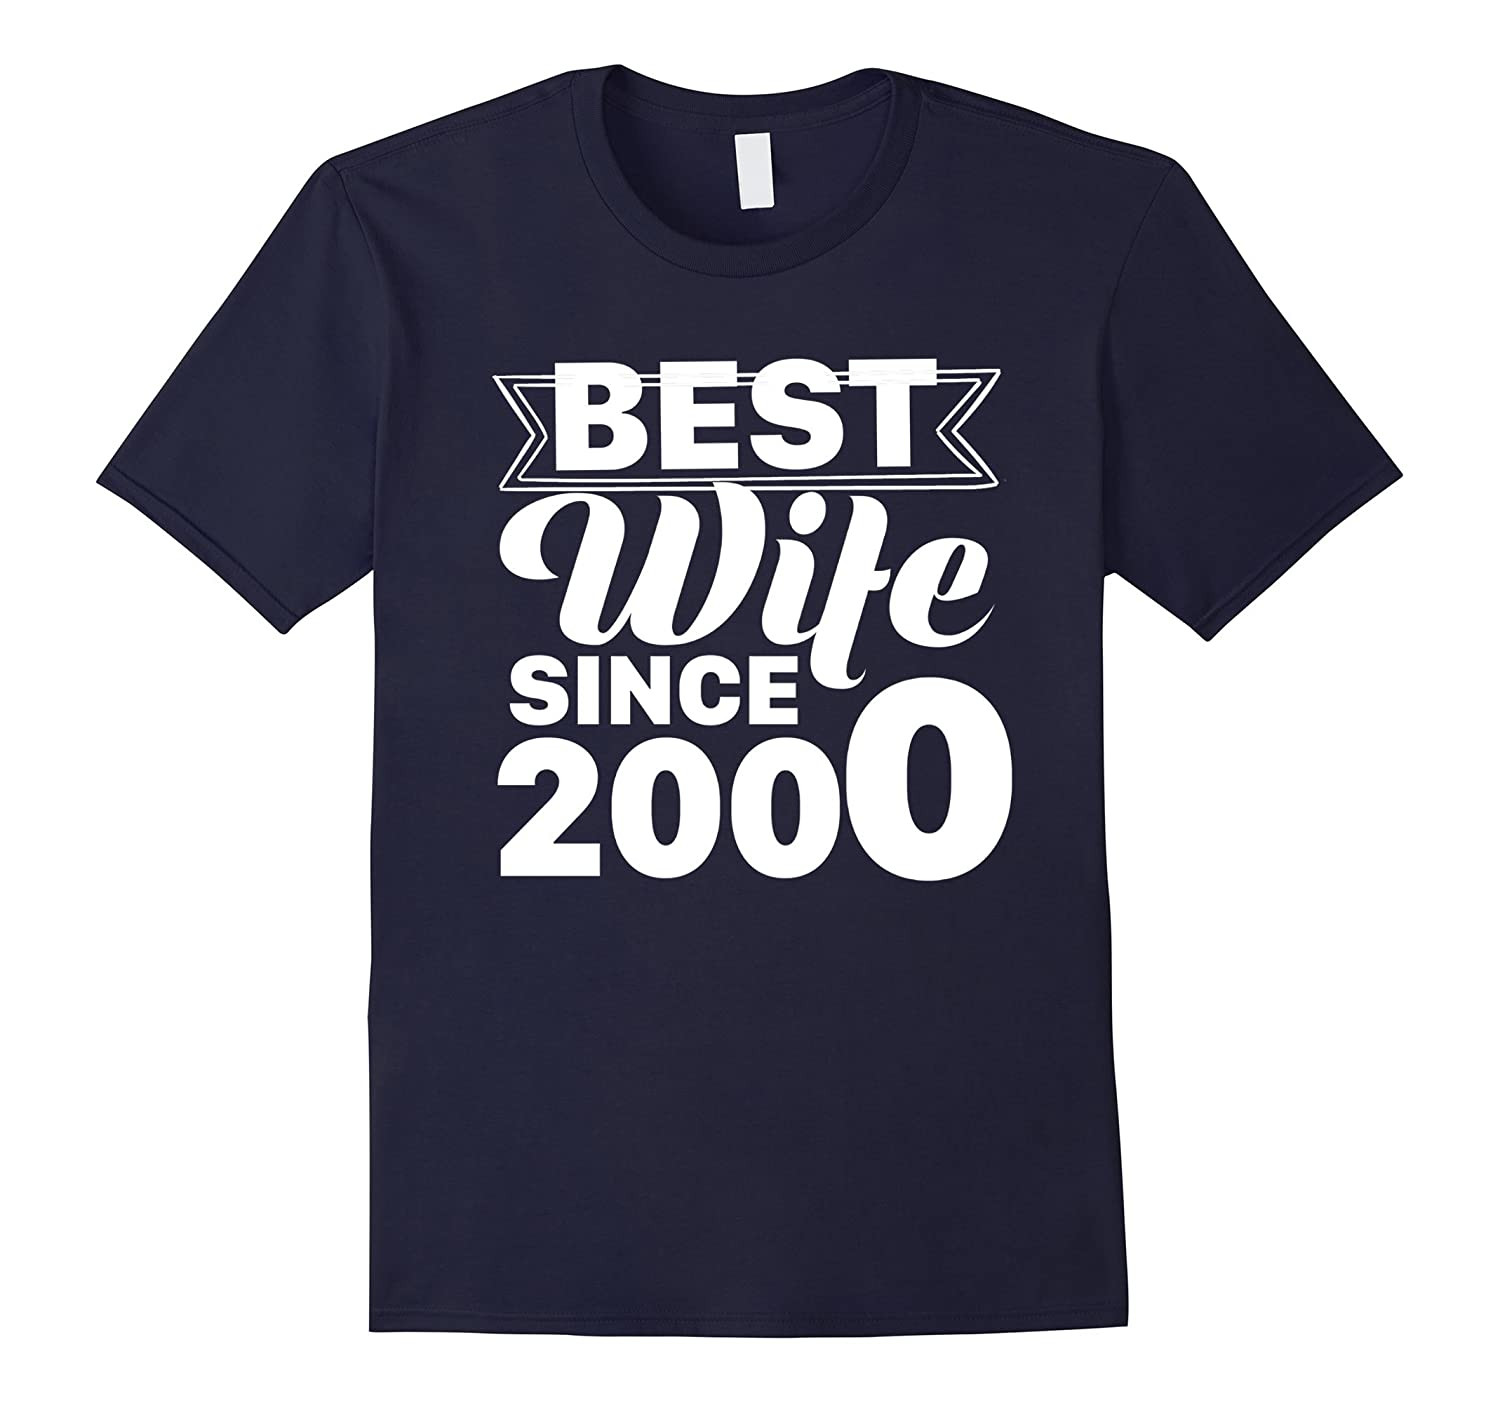 17Th Wedding Anniversary Gift Ideas For Her
 17th Wedding Anniversary Gift Ideas For Her Wife Since 2000